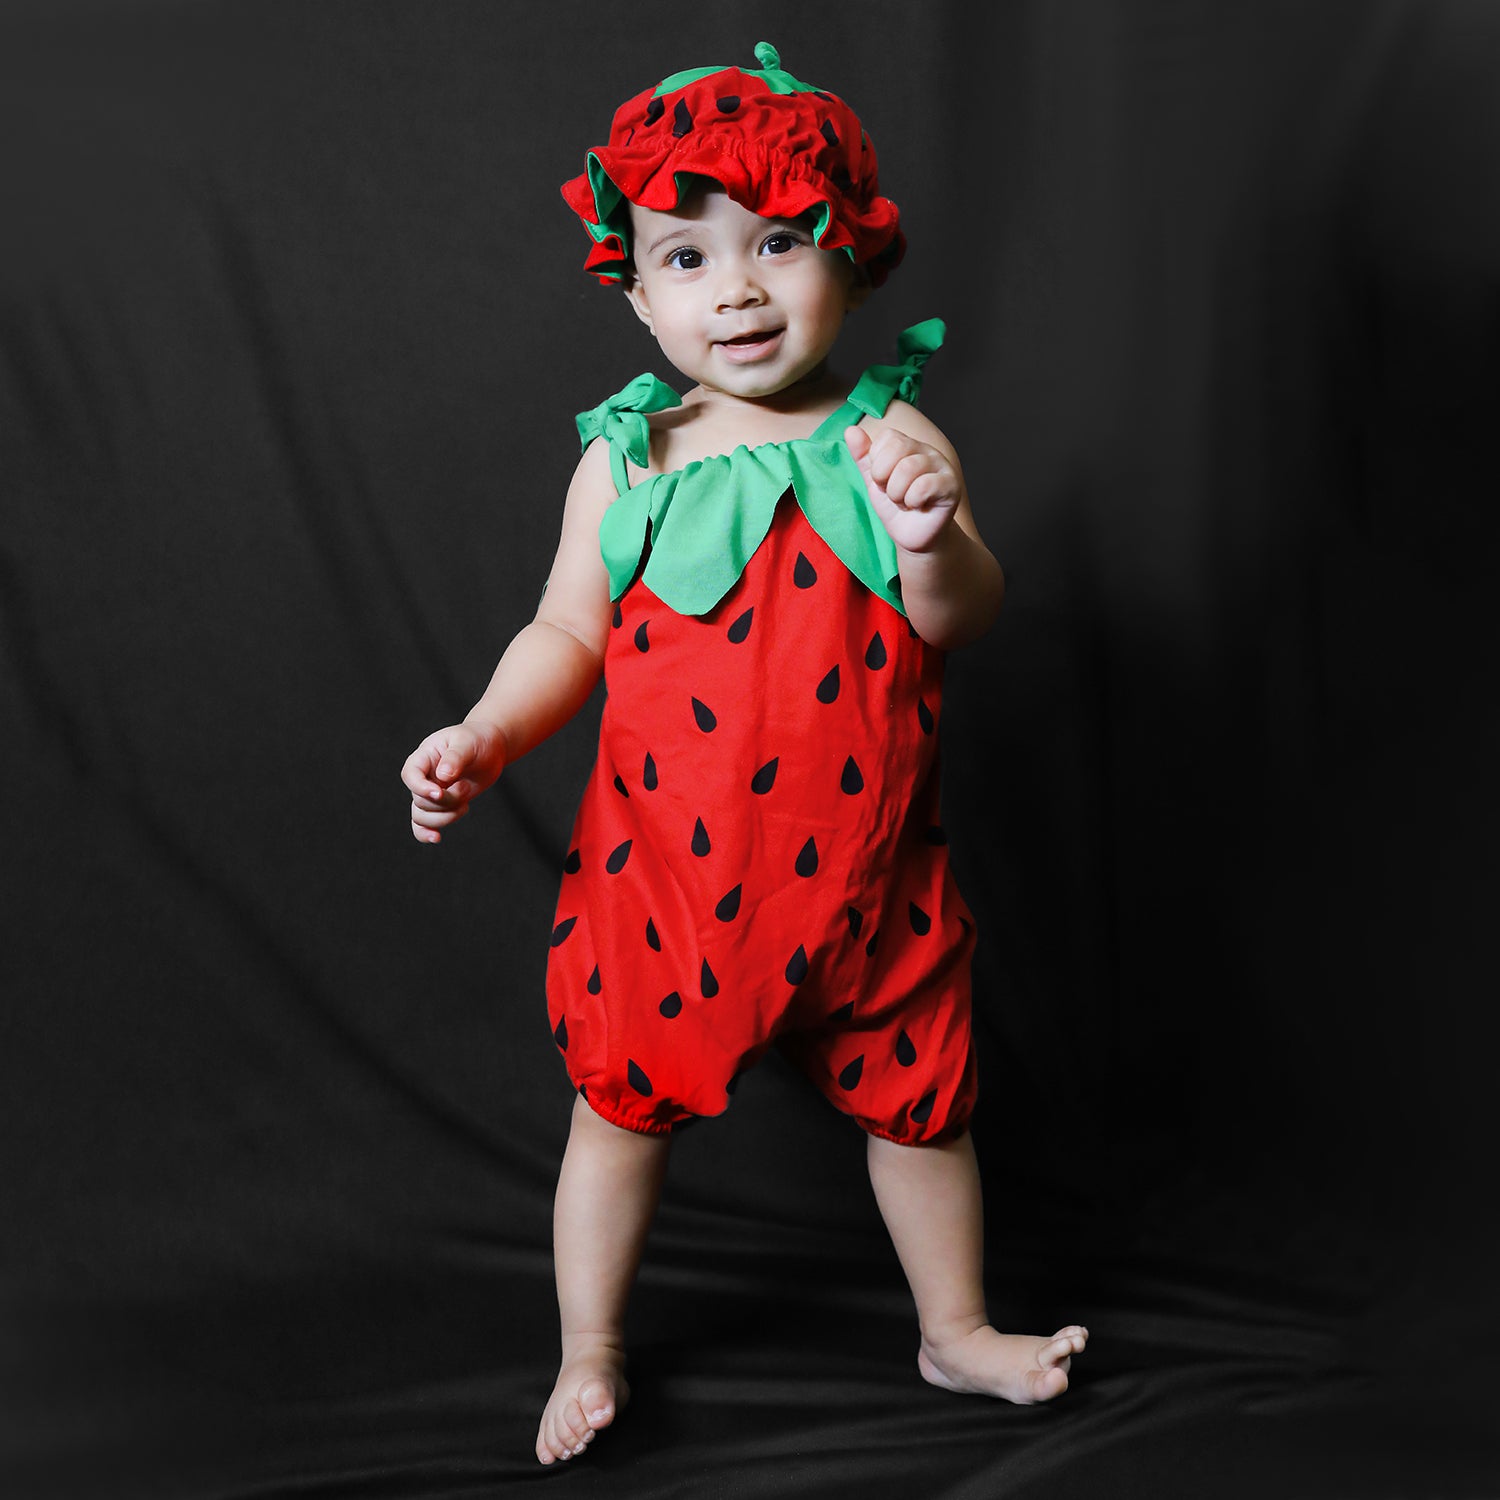 Baby Moo Stylish Strawberry Costume 2pcs Cap And Fancy Dress - Red